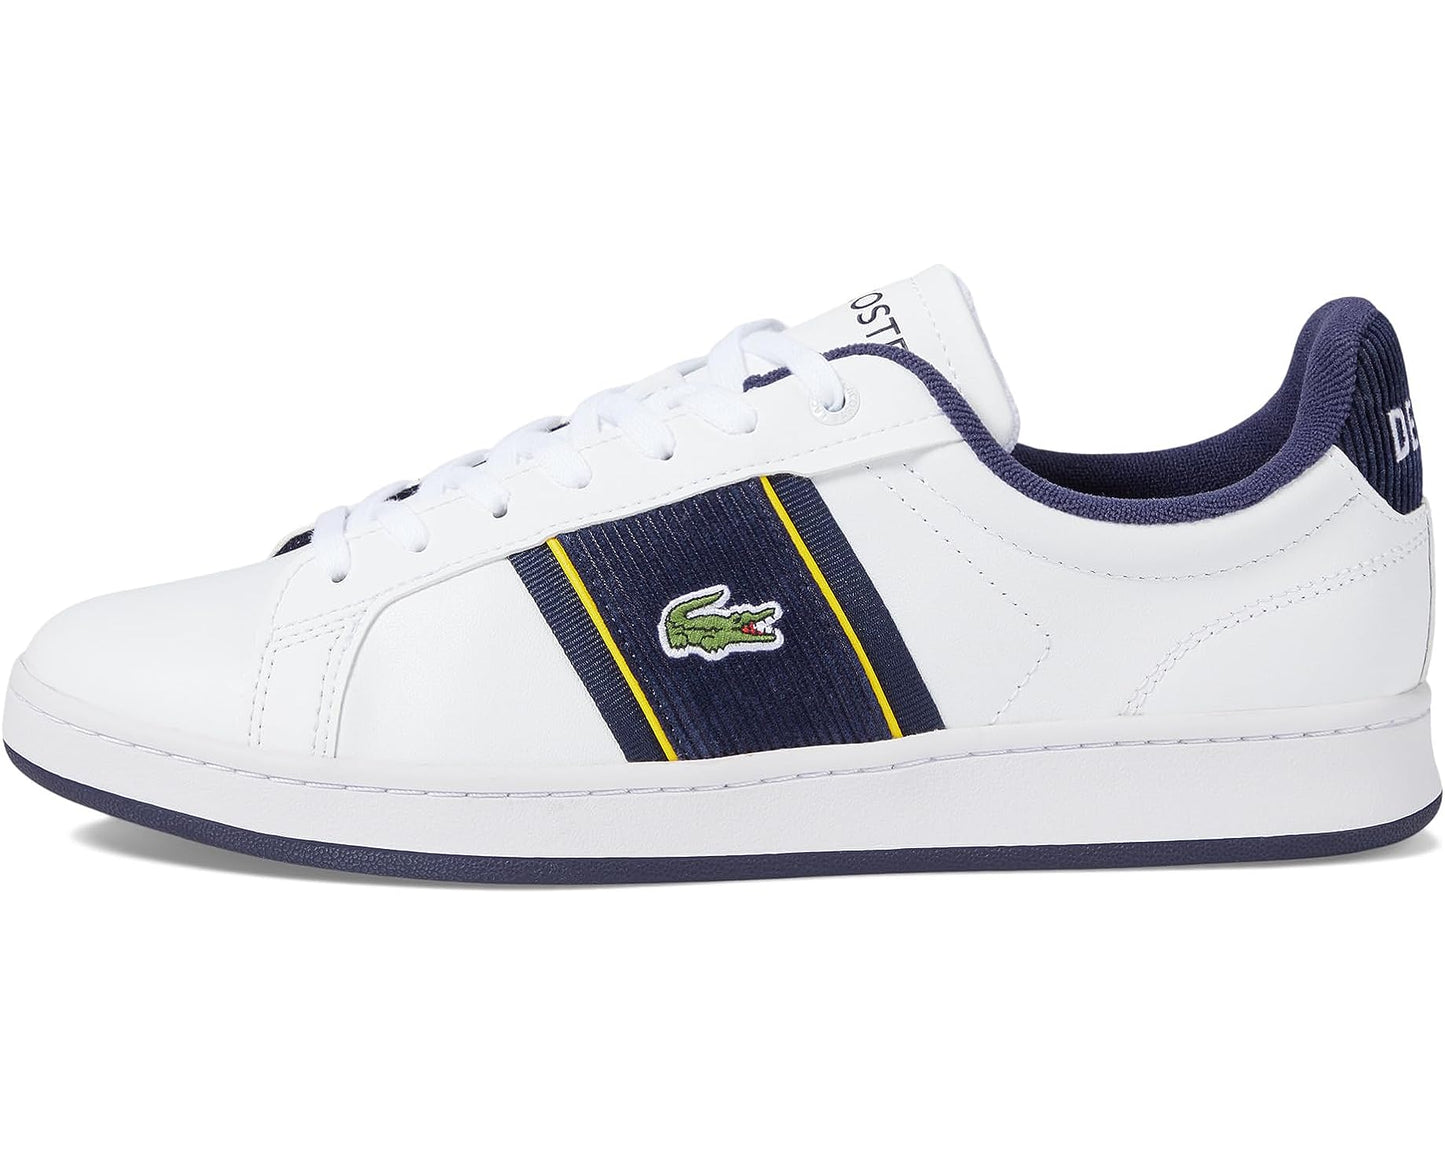 Lacoste Carnaby Pro Tonal Leather Sneakers In White | MYER